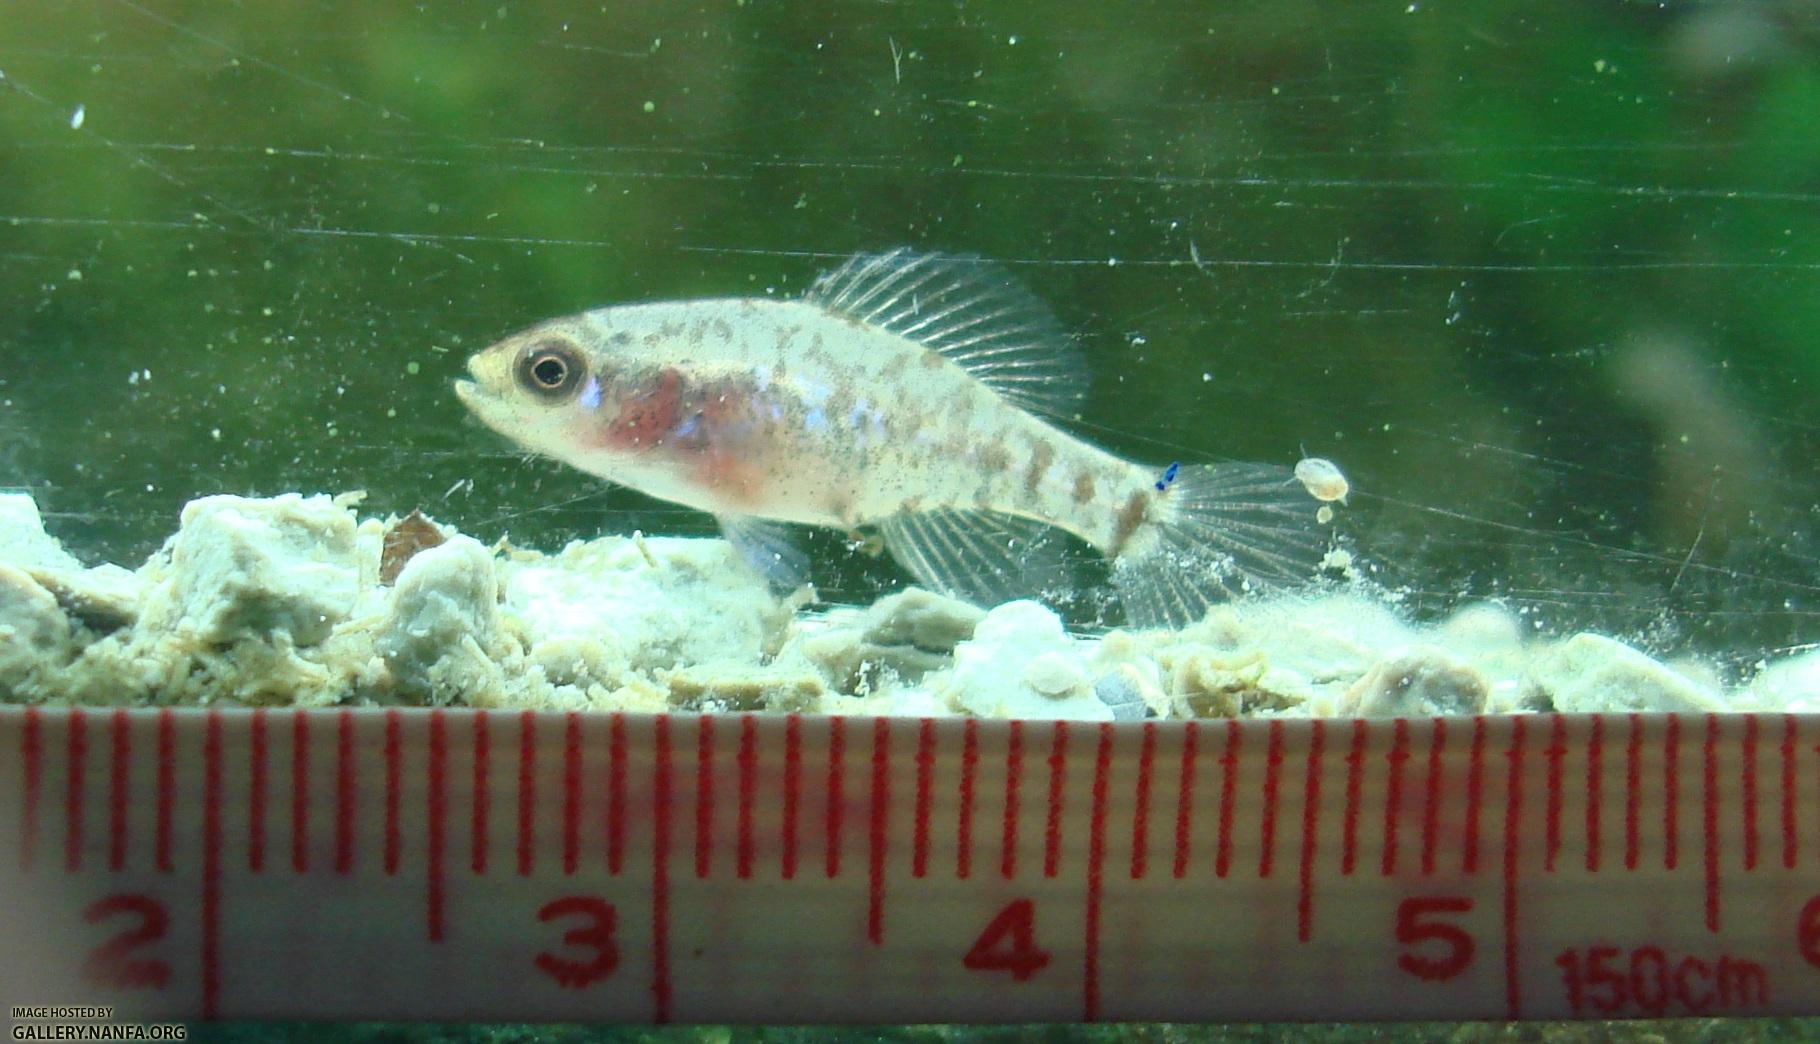 Scaled image in centimeters of gulf coast pygmy sunfish